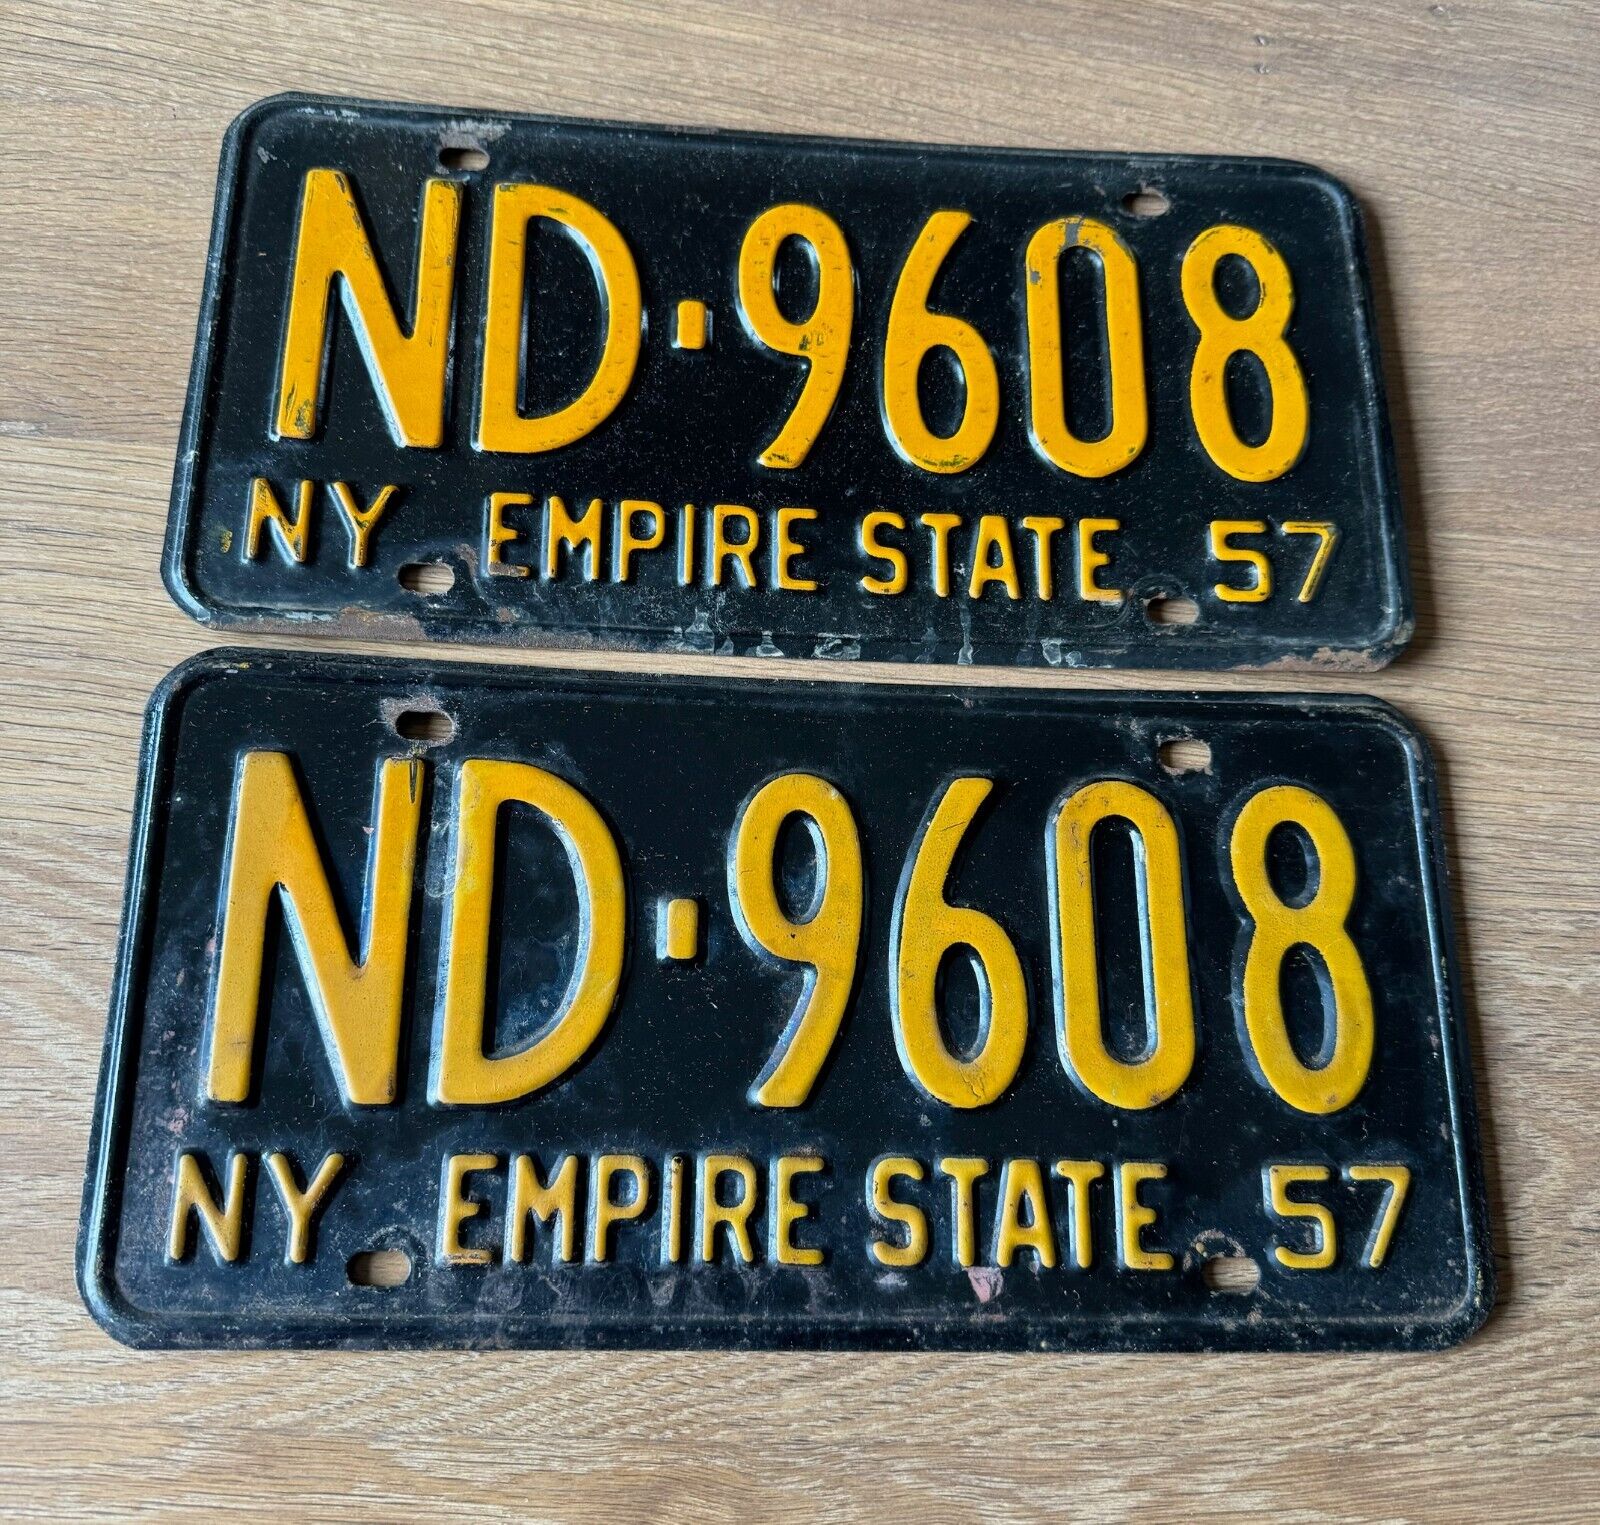 TWO VINTAGE 1957 NEW YORK STATE LICENSE PLATES BOTH WITH THE SAME NUMBER ND-9608